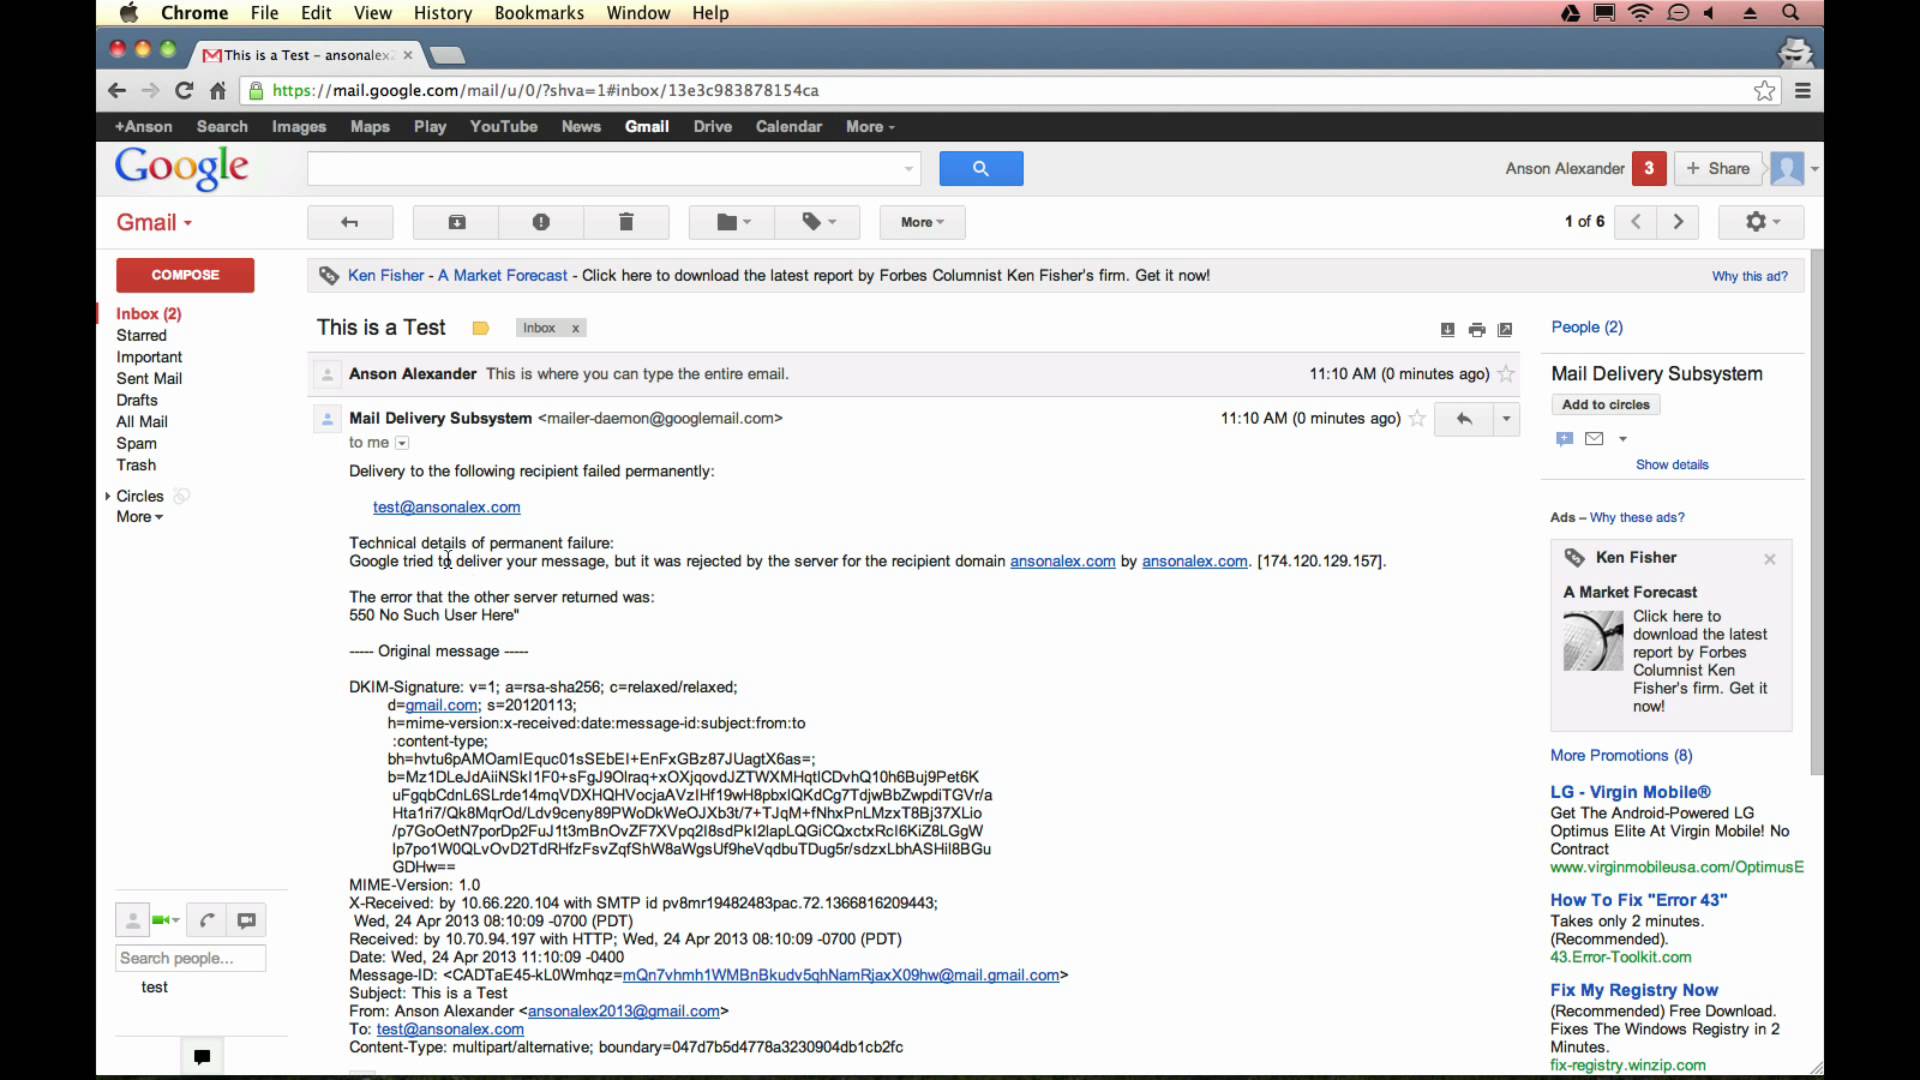 gmail emails containing videos